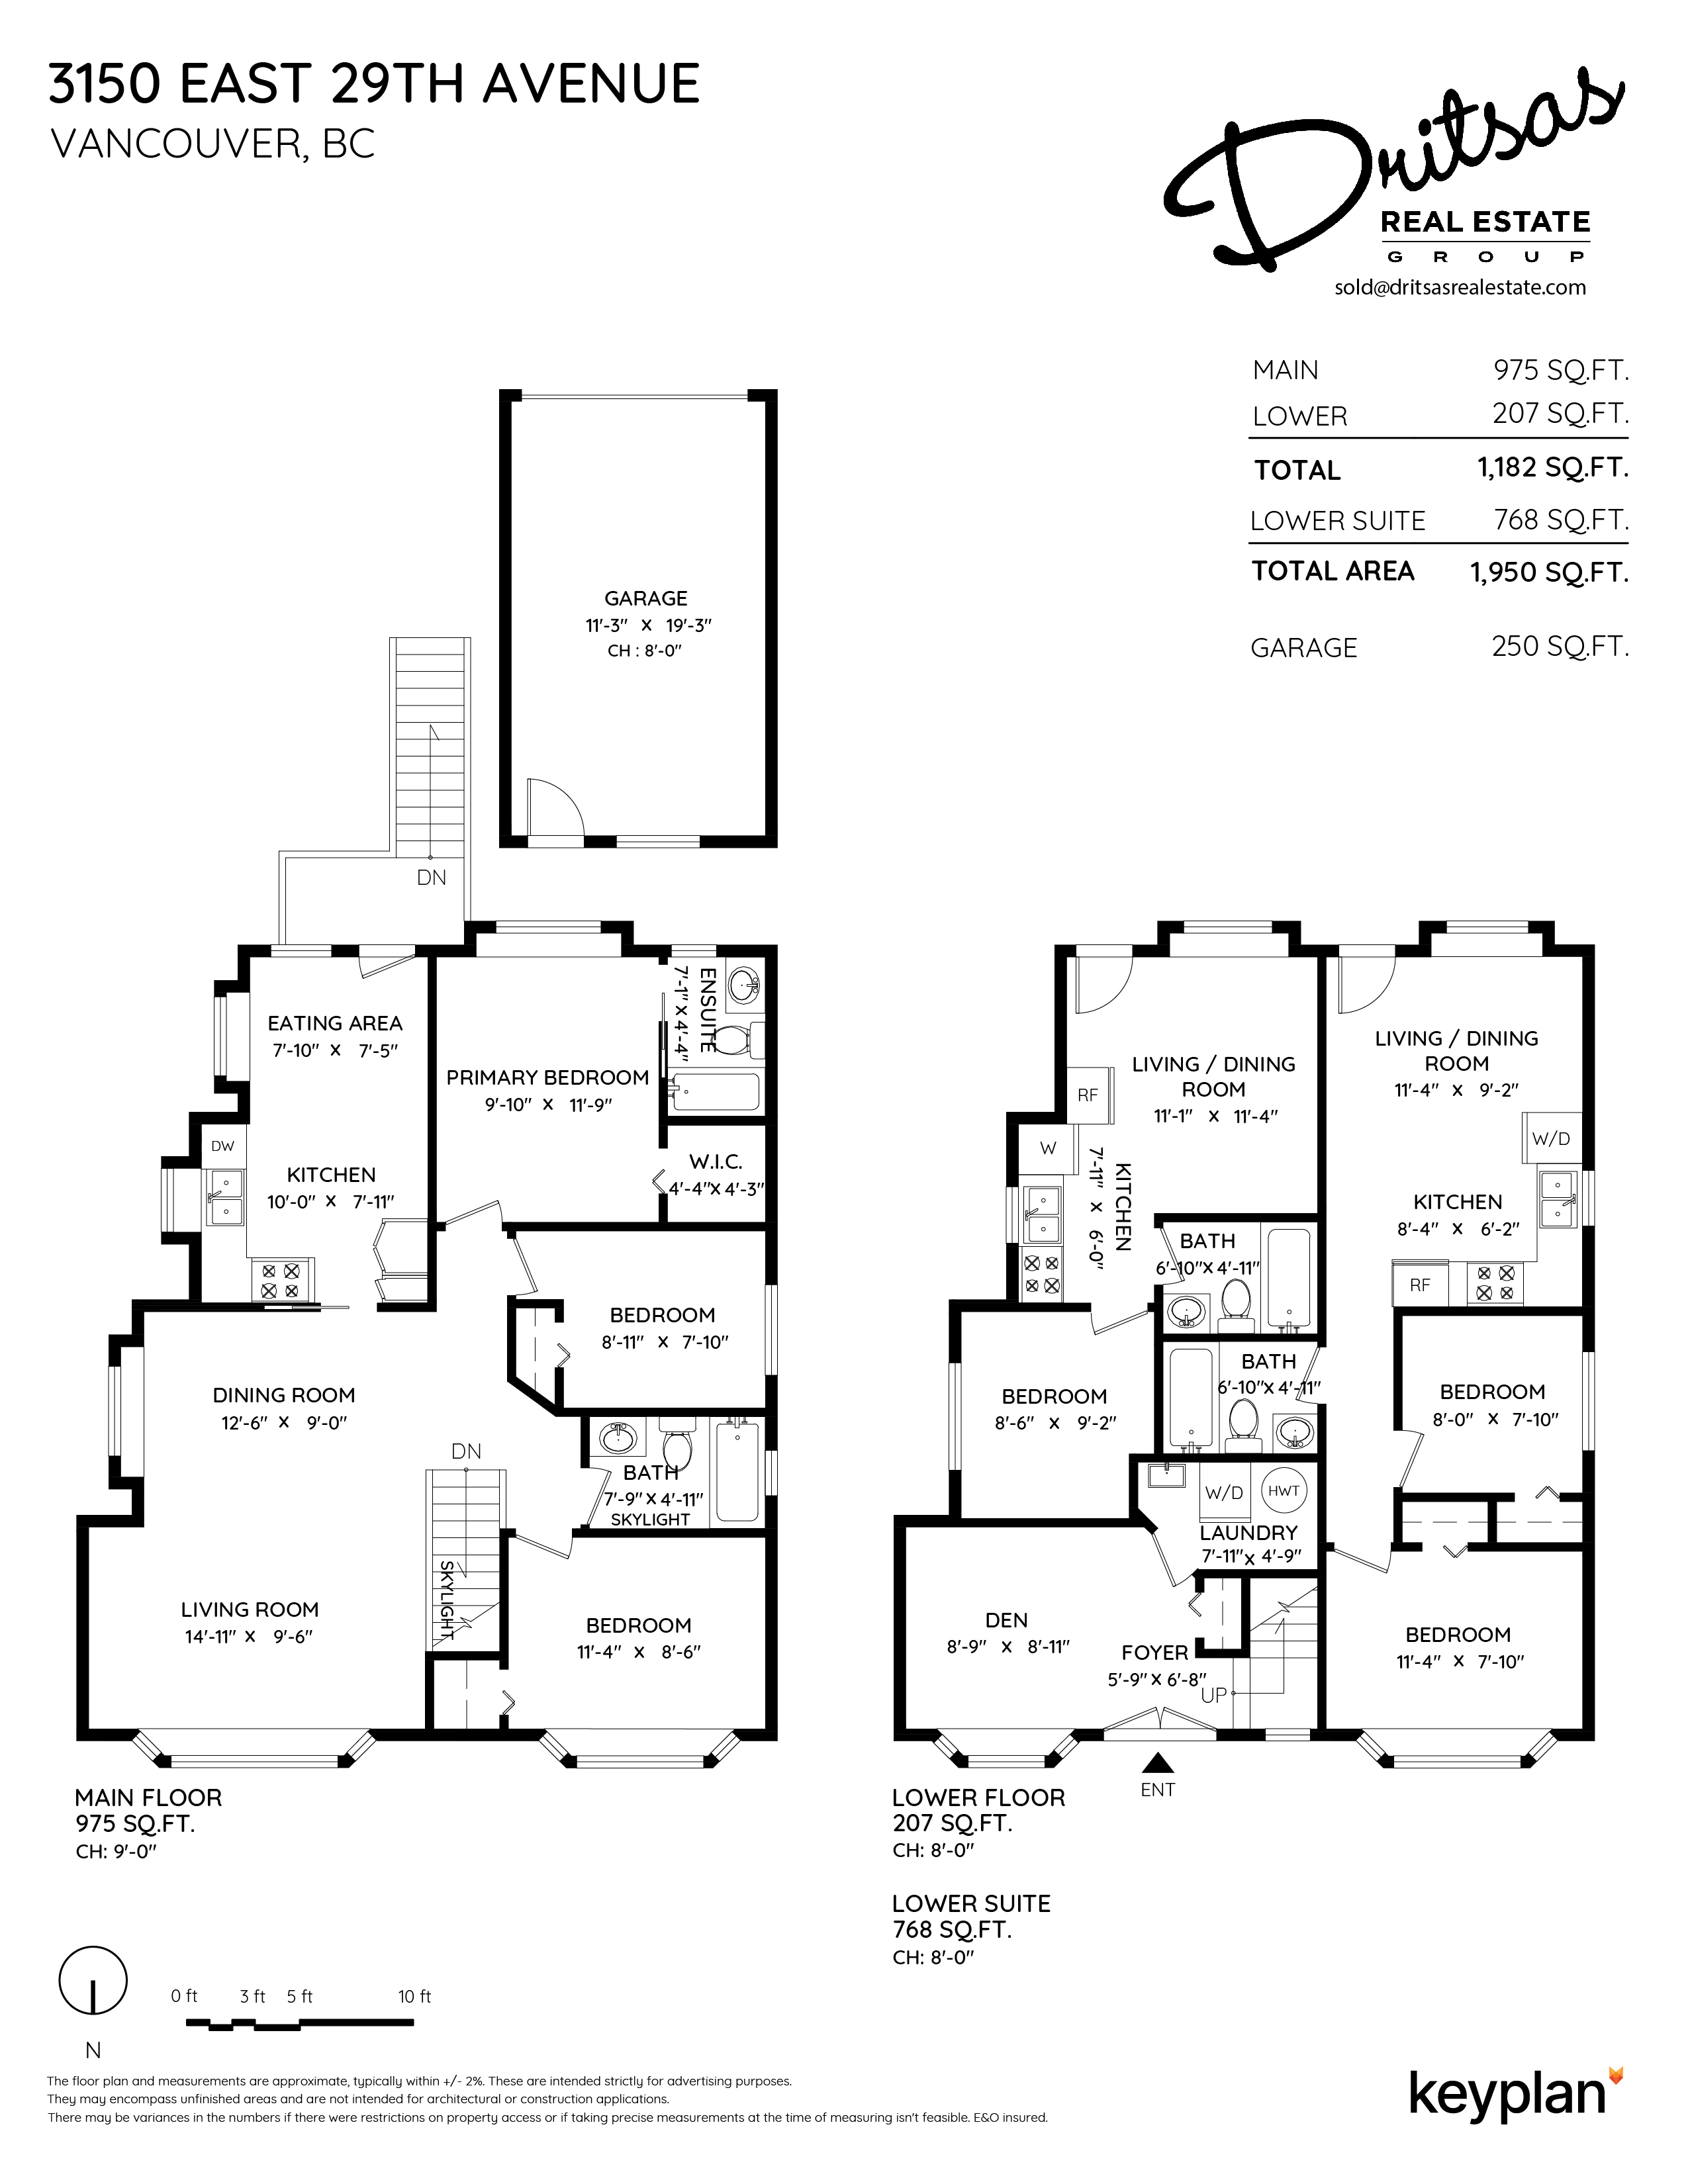 Dritsas Real Estate Group - 3150 East 29th Avenue, Vancouver, BC, Canada | Floor Plan 1